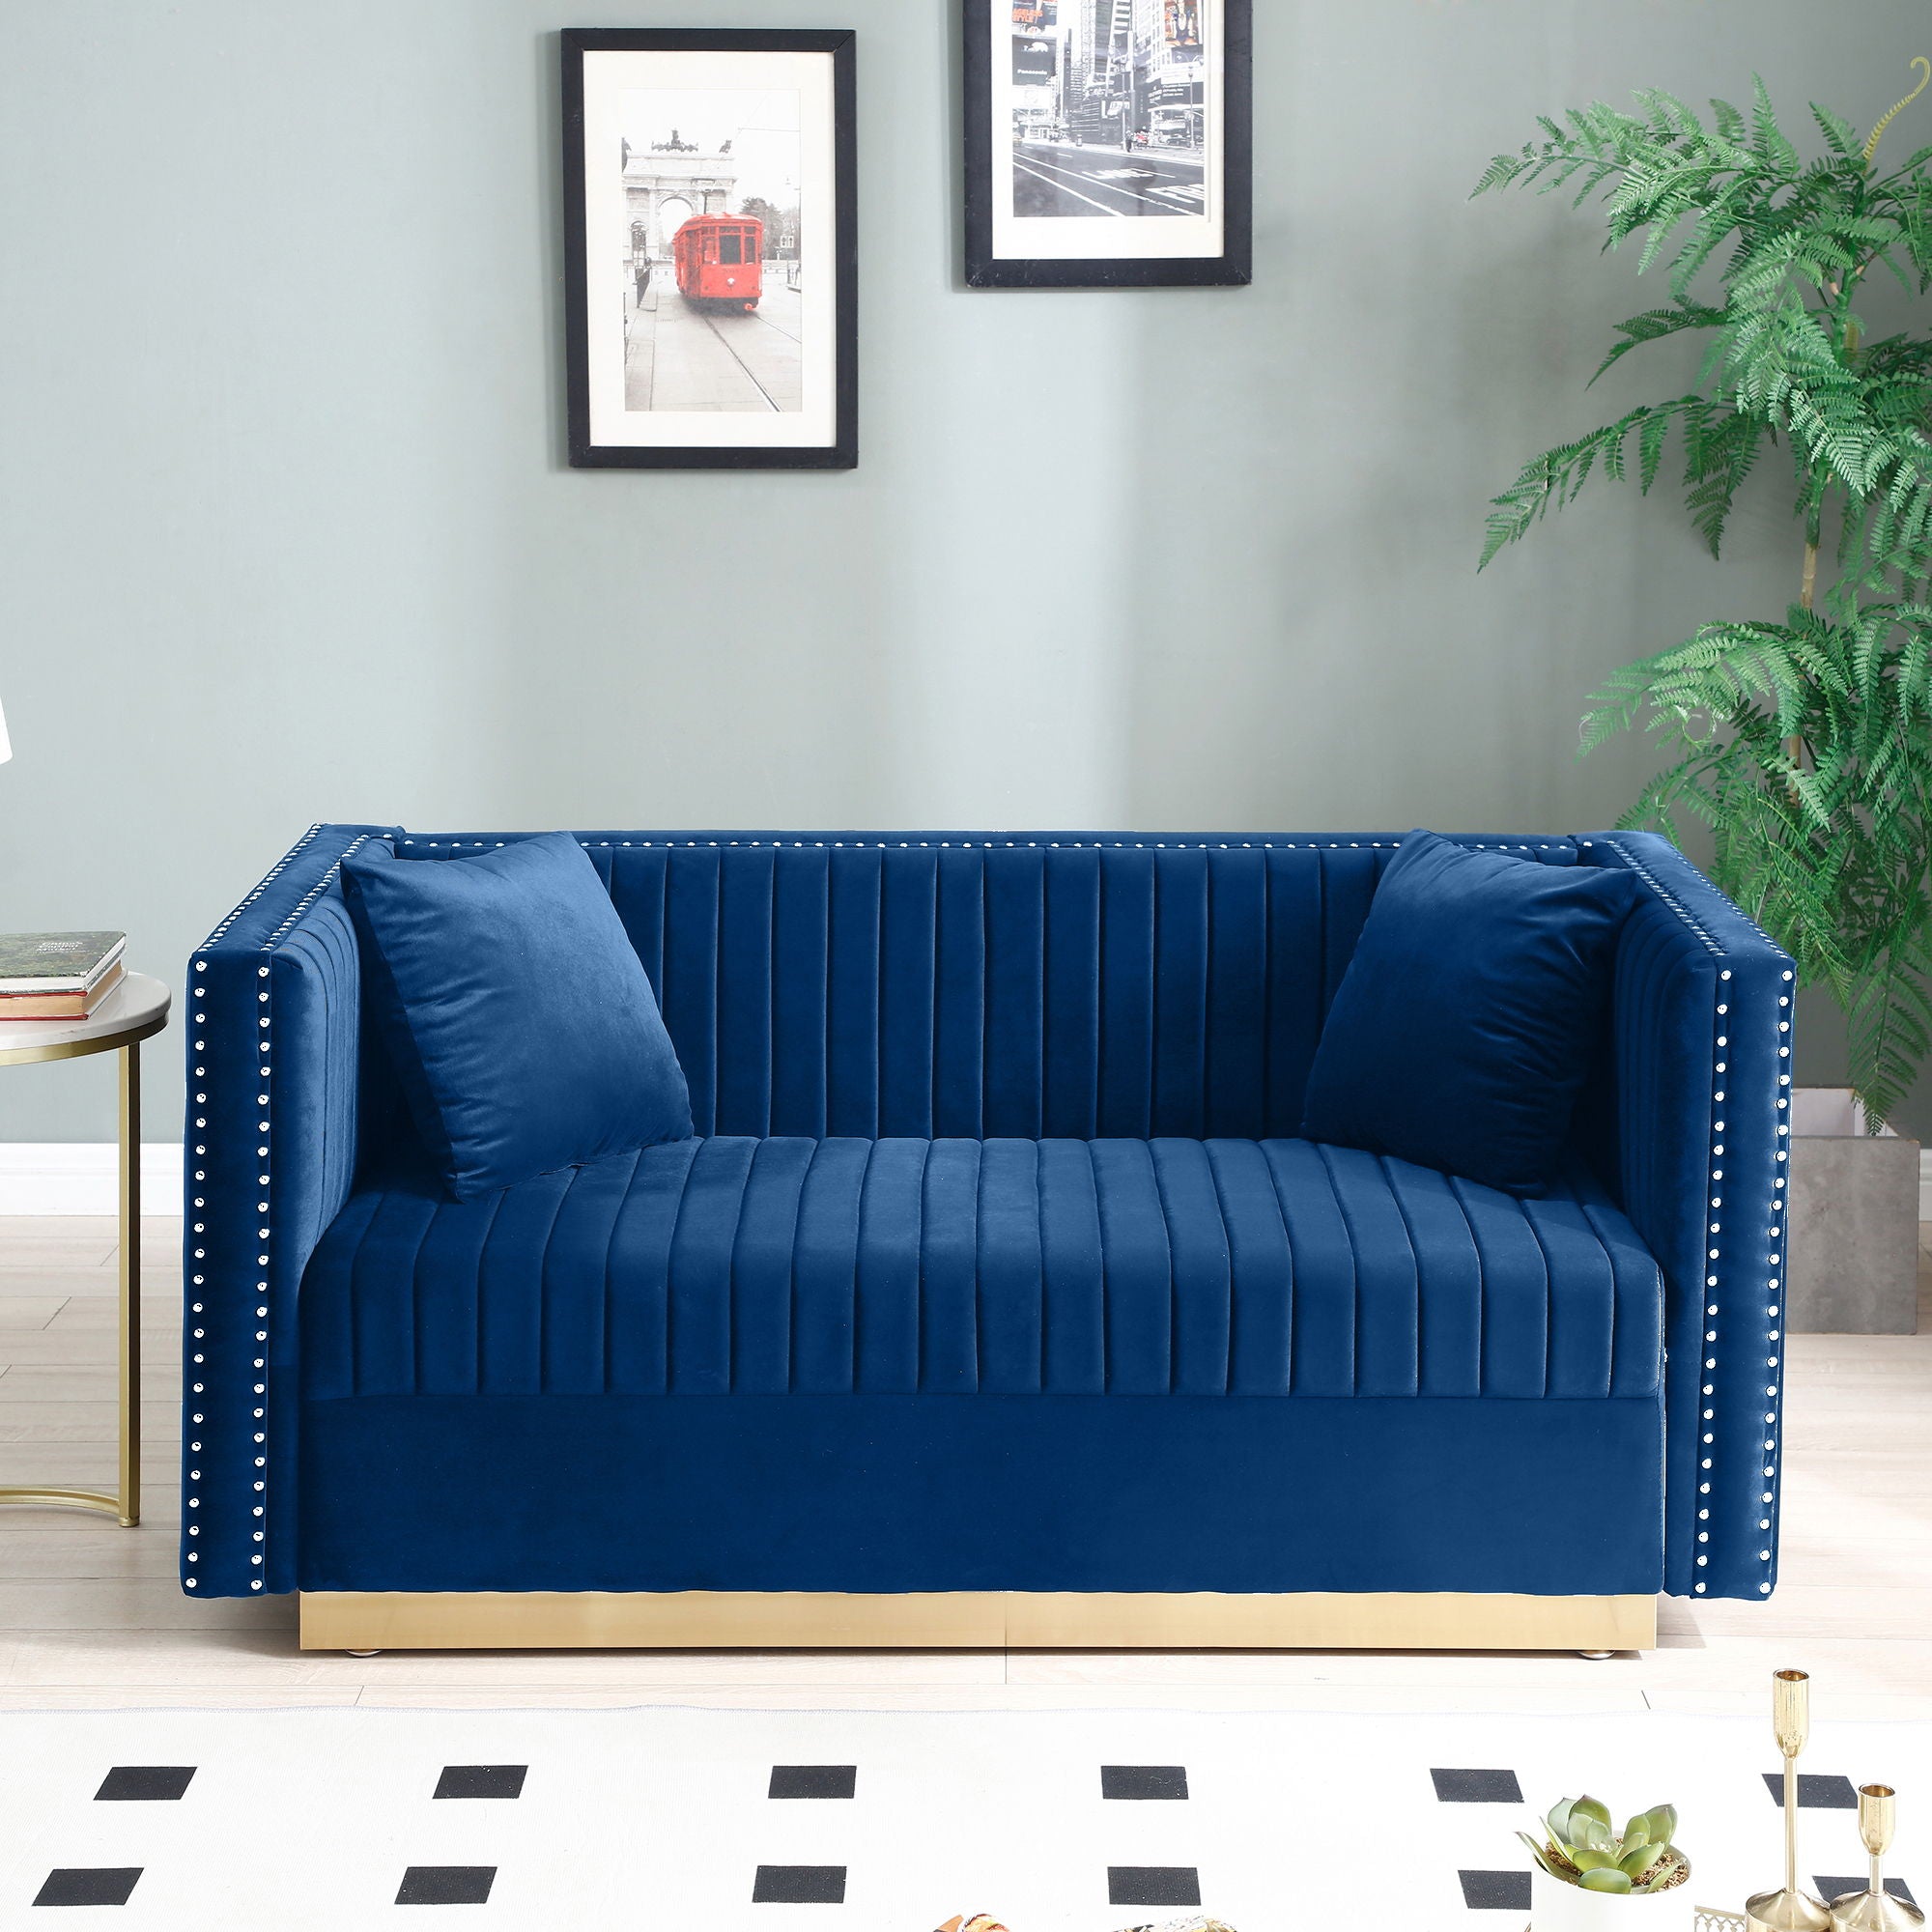 Contemporary Vertical Channel Tufted Velvet Sofa Loveseat Modern Upholstered 2 Seater Couch For Living Room Apartment With 2 Pillows, Blue